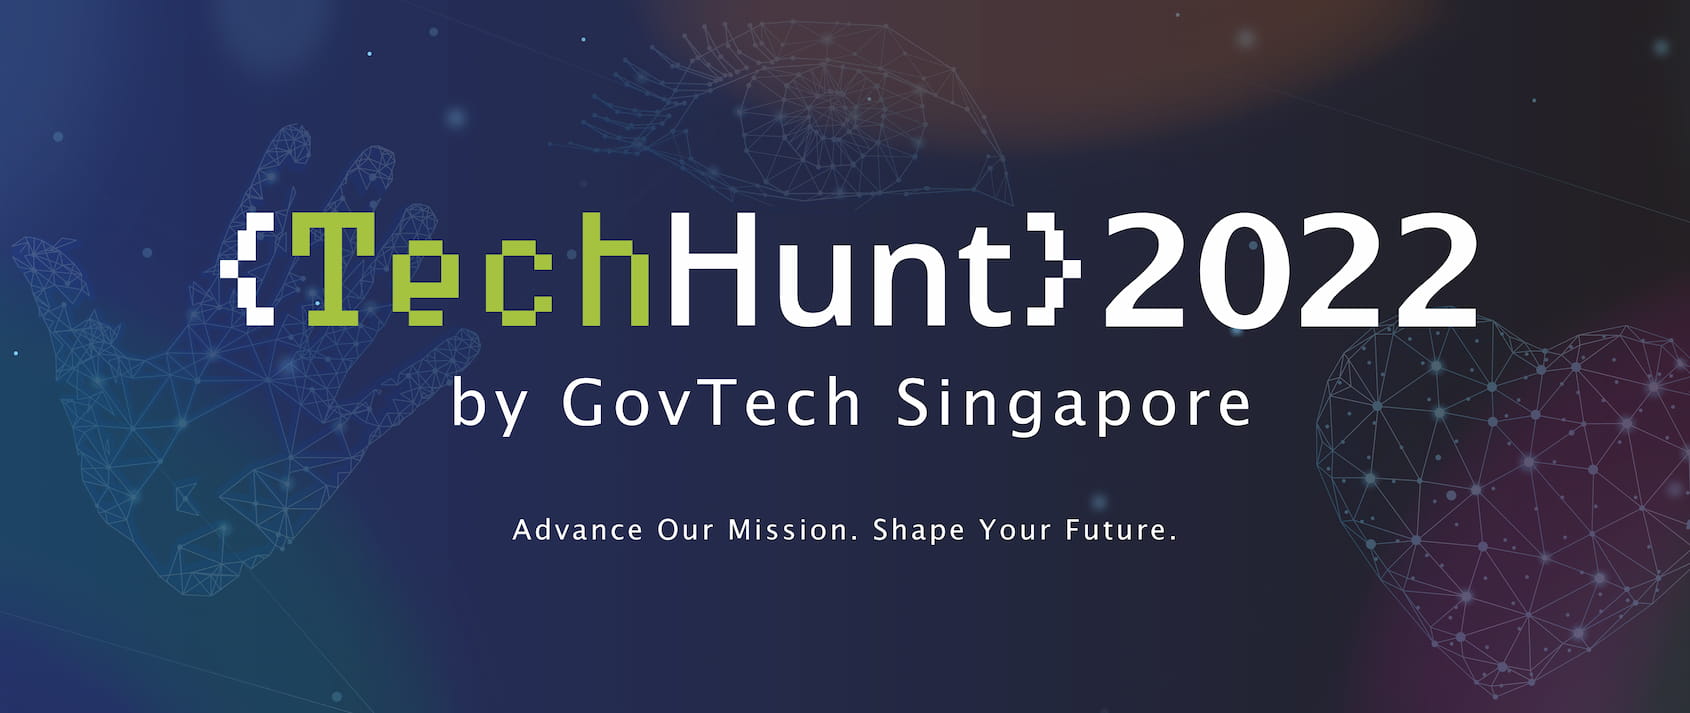 TechHunt 2022 banner by GovTech Singapore